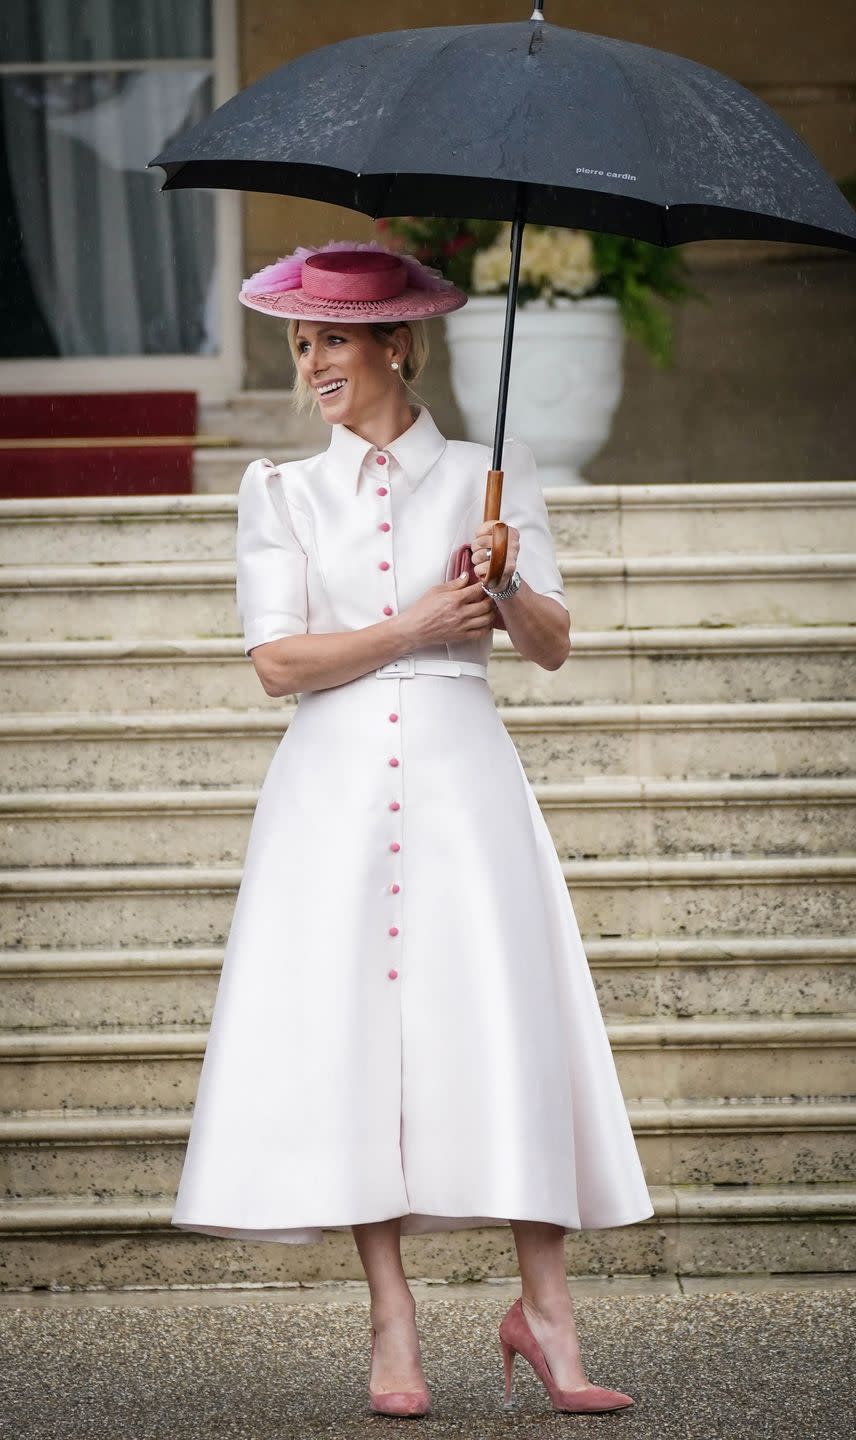 zara tindall arrives to attend the sovereigns garden party, at buckingham palace, central london, on may 21, 2024 photo by yui mok pool afp photo by yui mokpoolafp via getty images